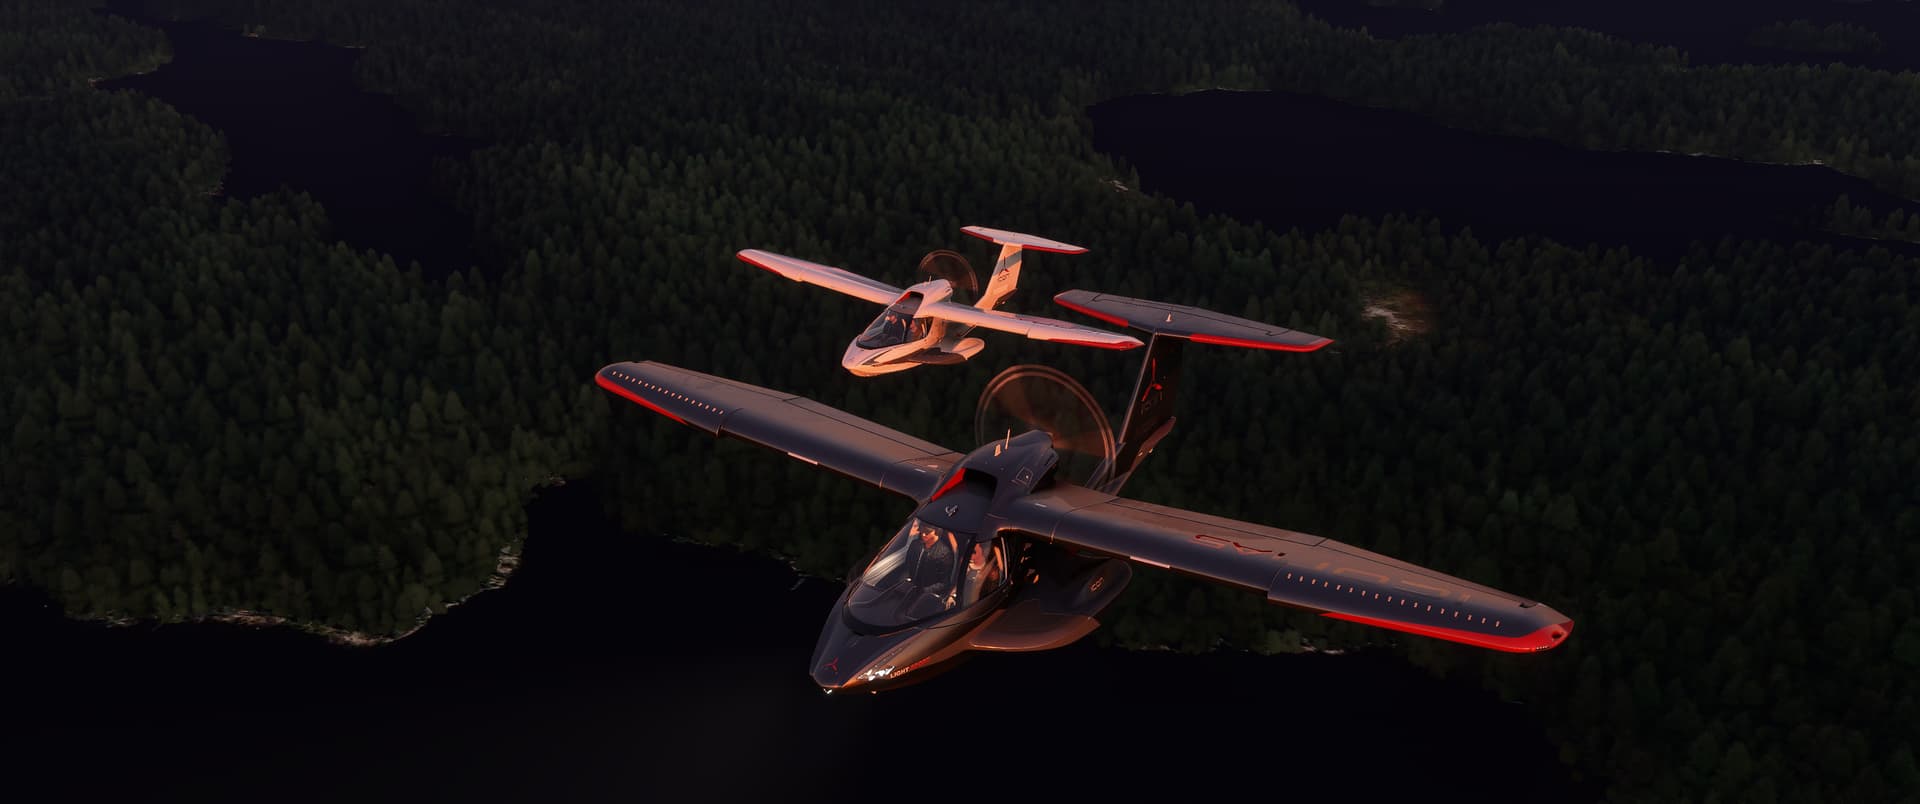 Two Icon A5 aircraft in close formation